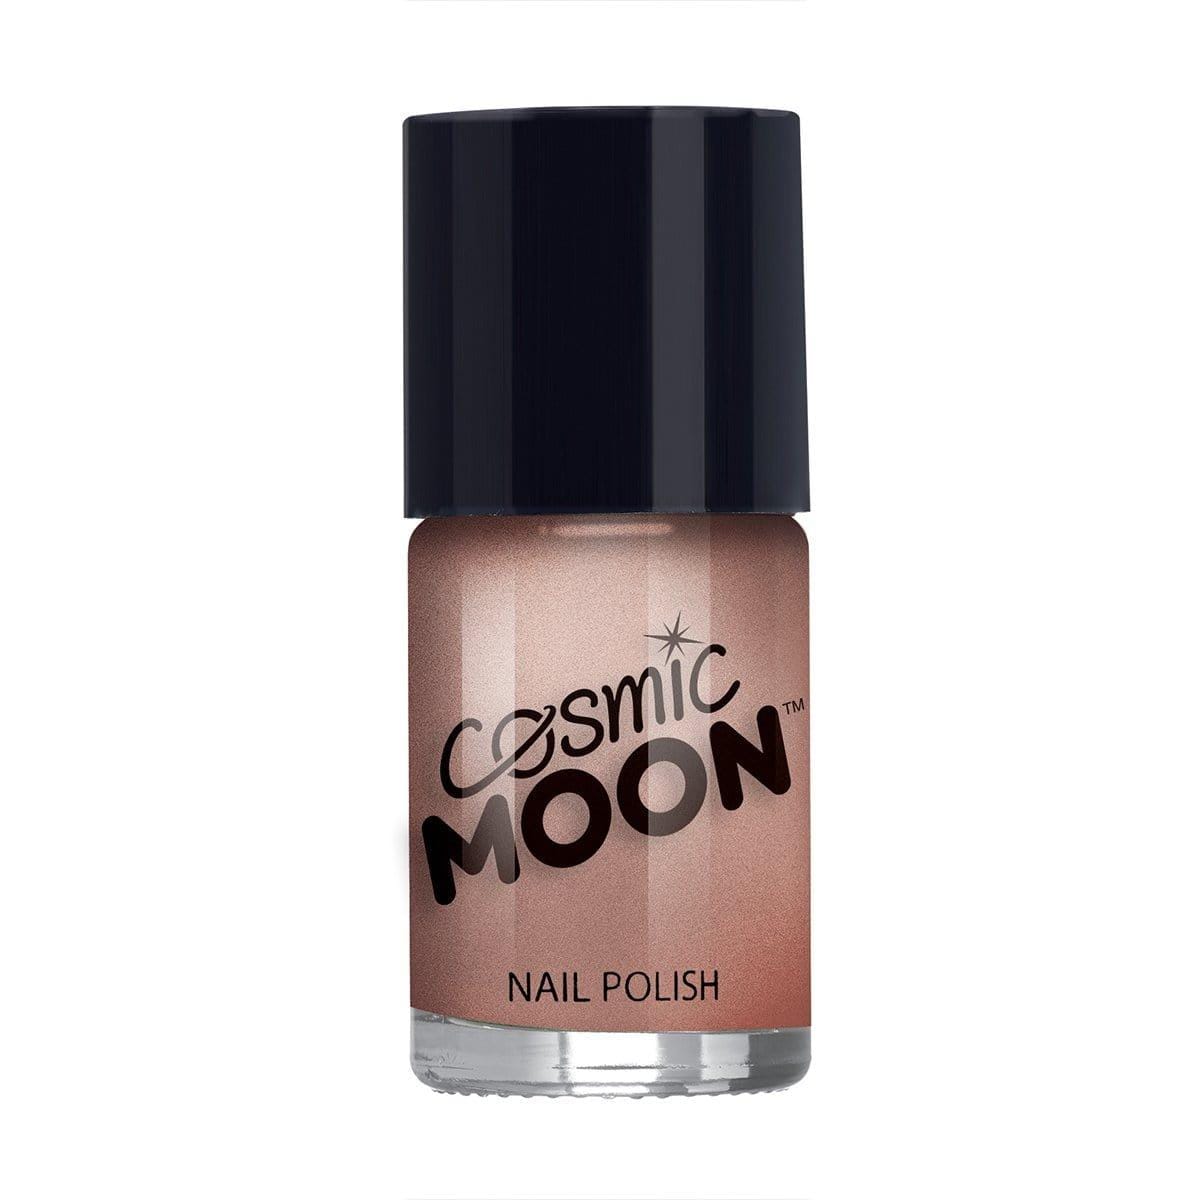 Buy Costume Accessories Moon rose gold metallic nail polish sold at Party Expert